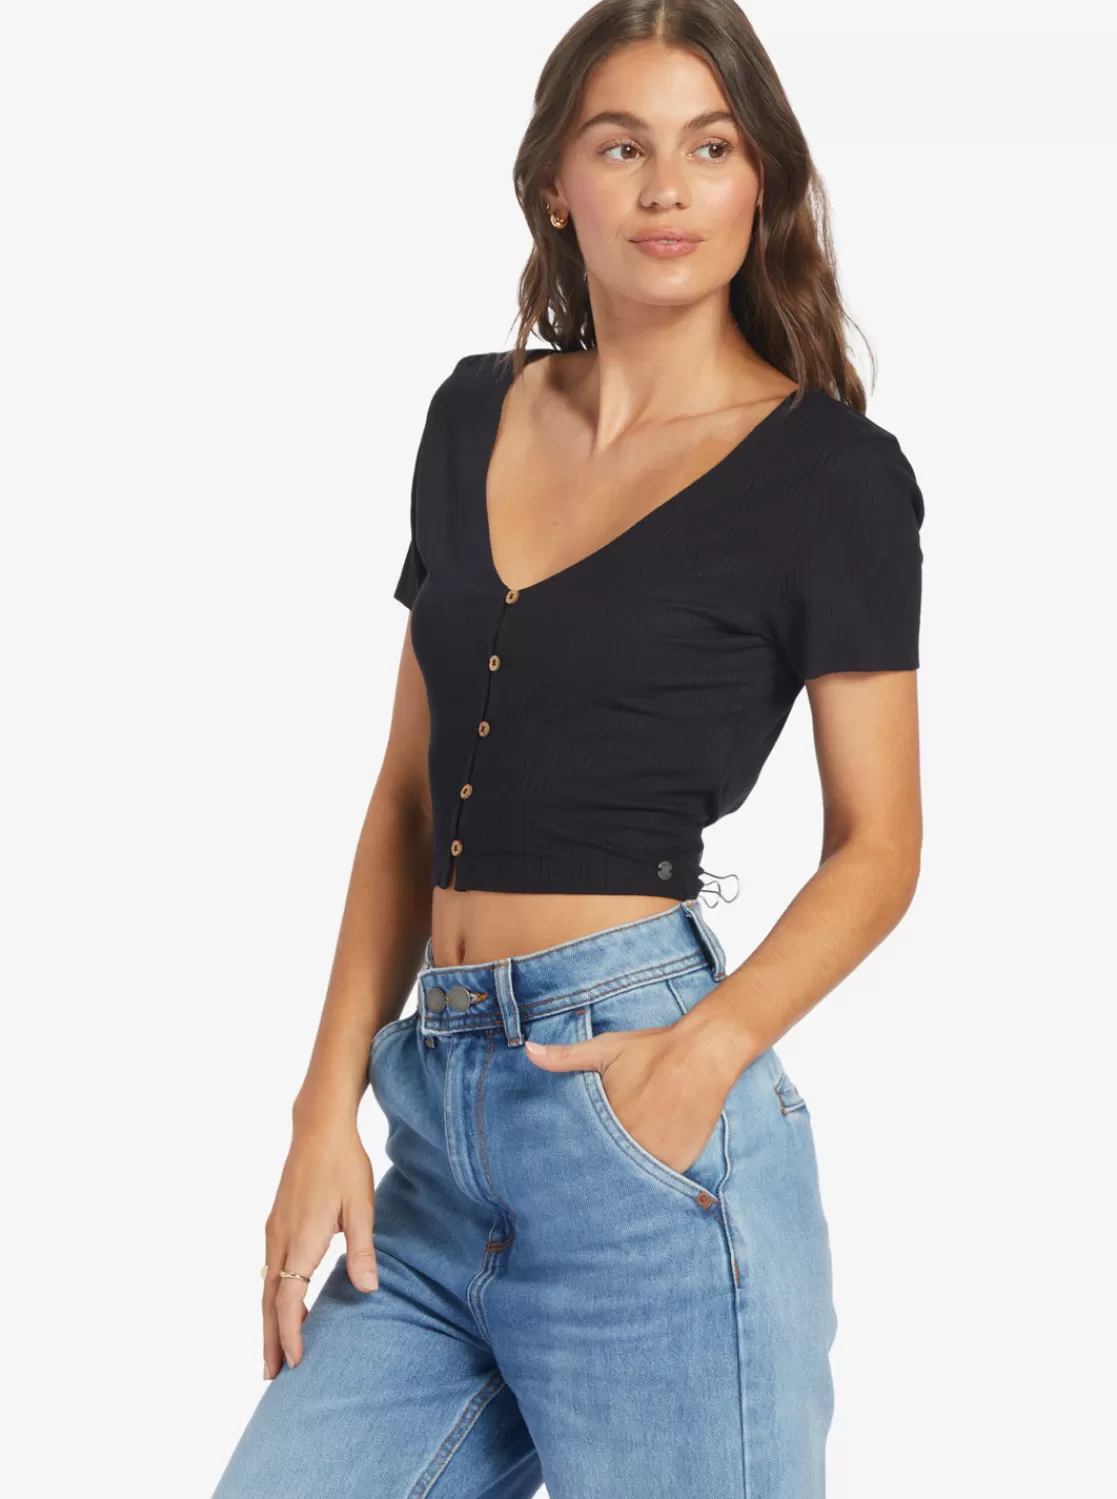 Born With It Crop Top-ROXY Discount